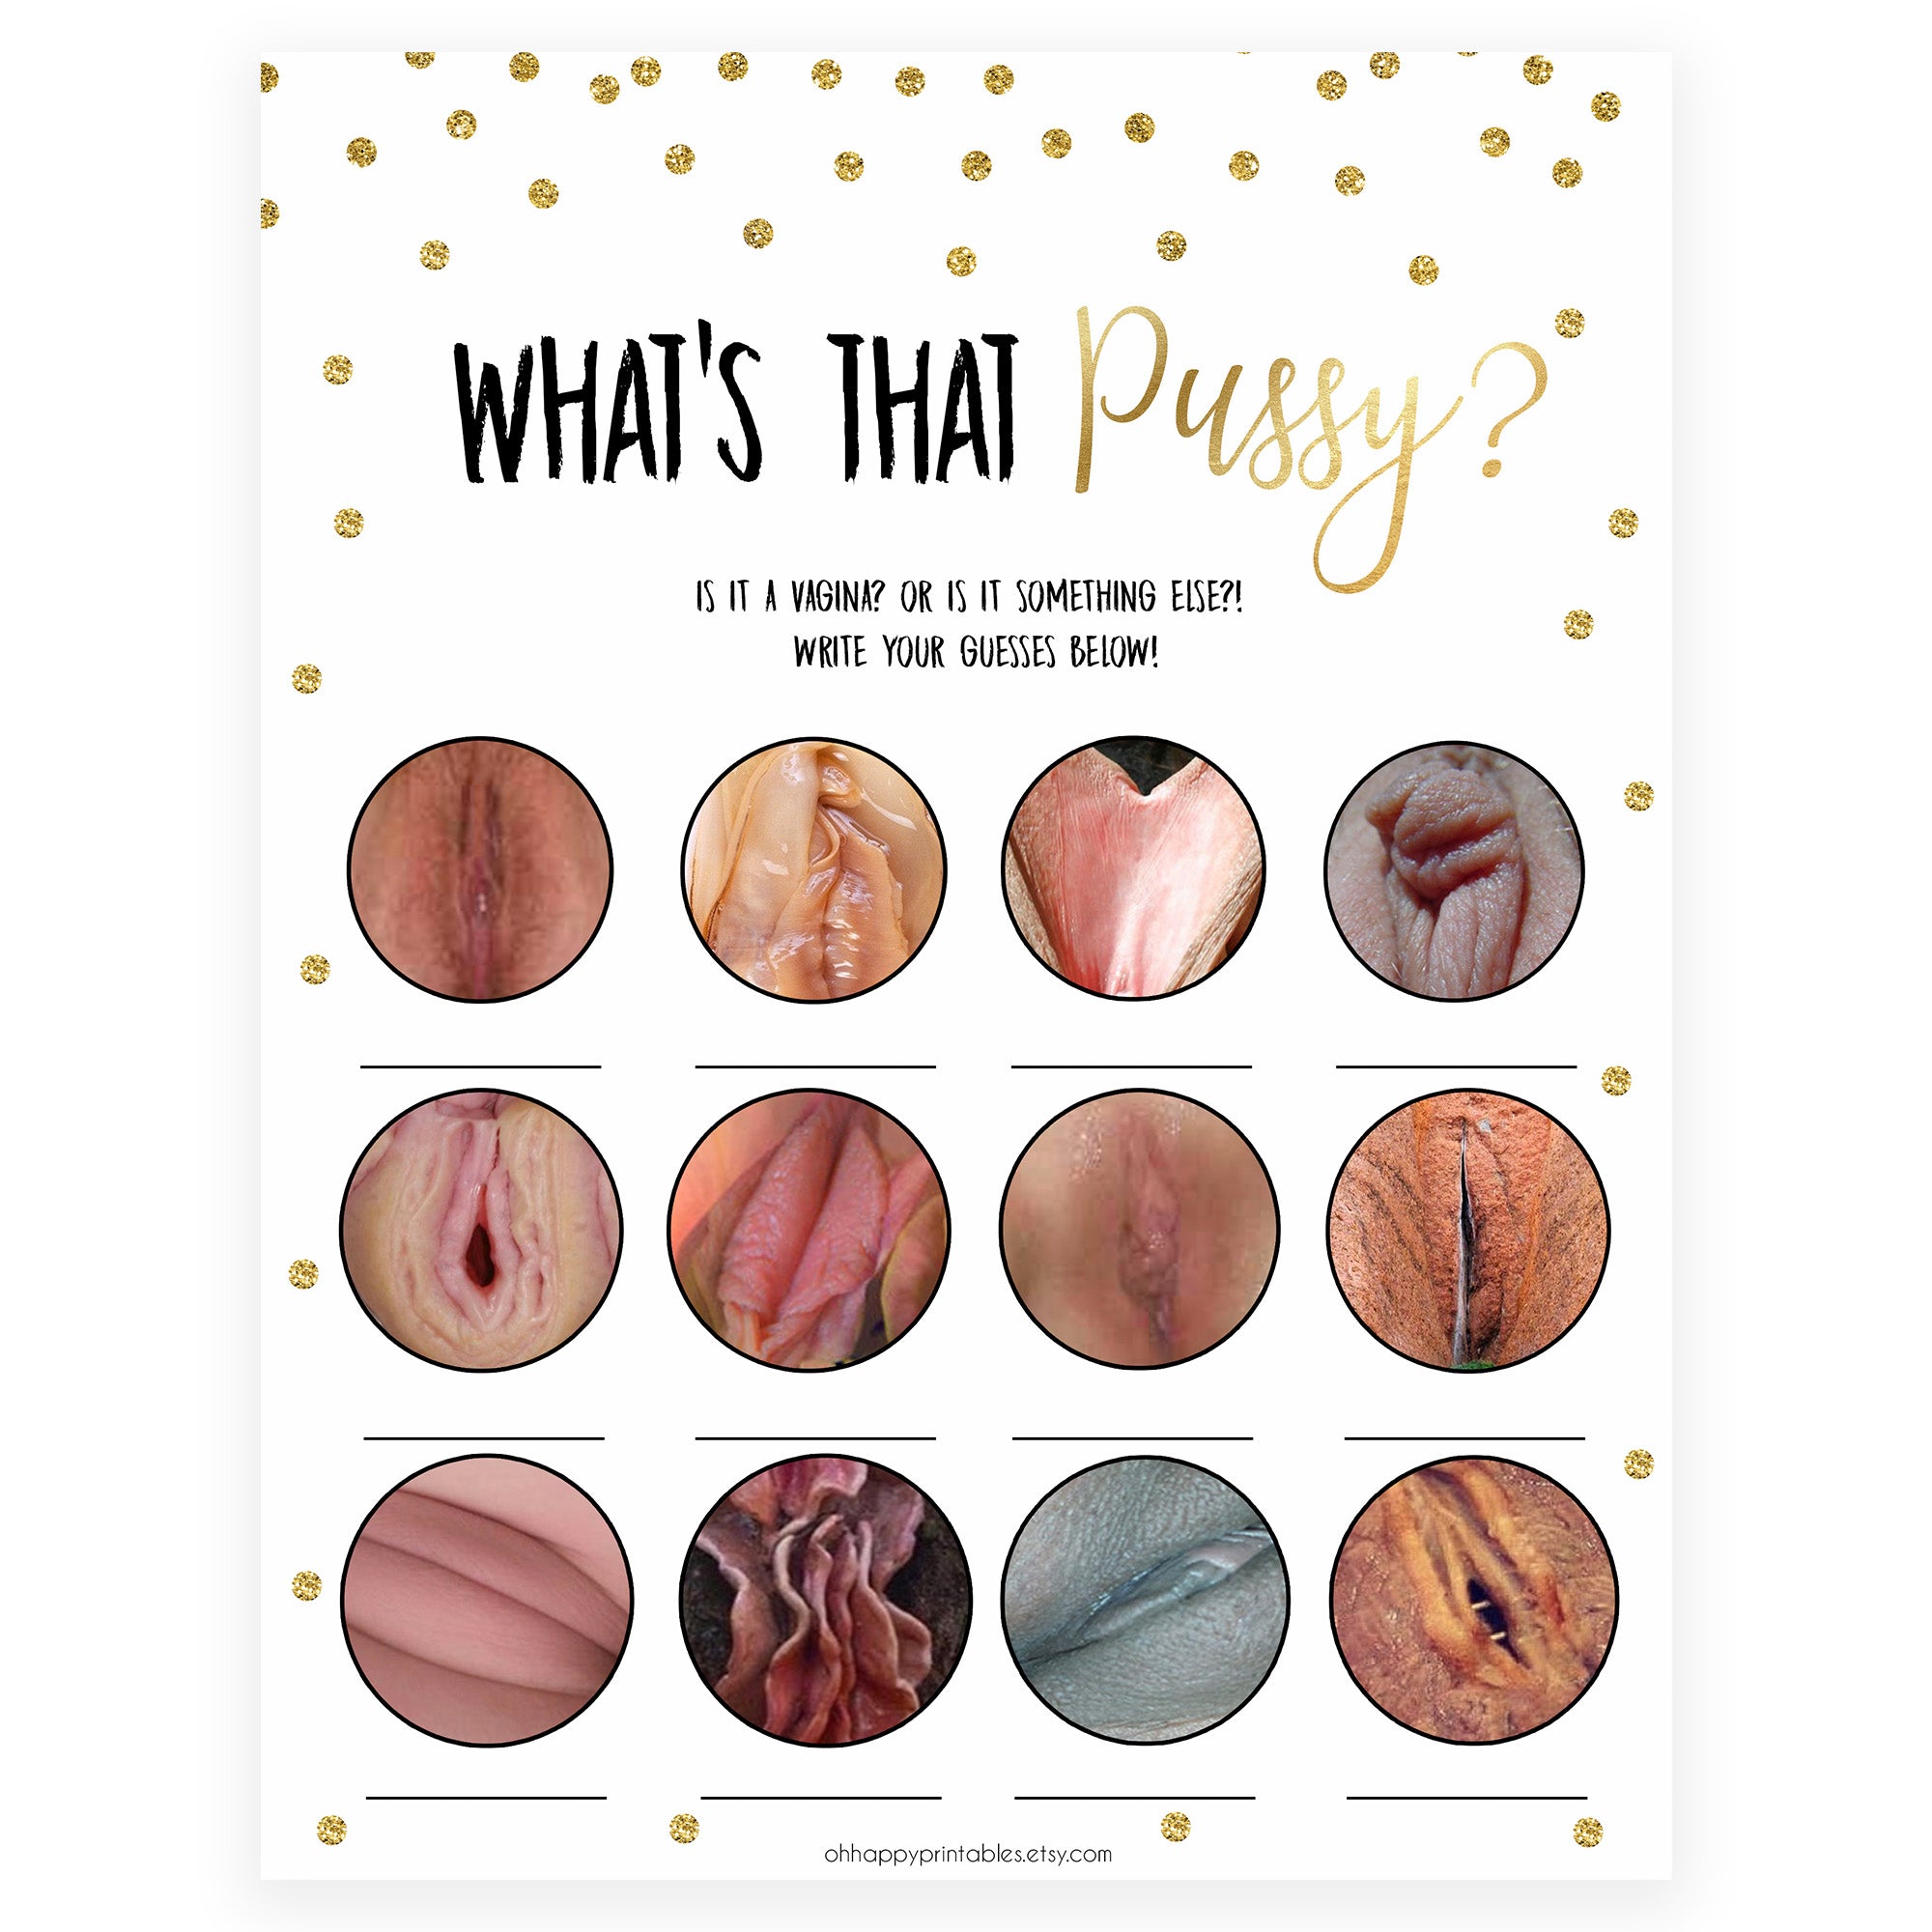 whats that pussy, guess the pussy game, lesbian bridal games, Printable bachelorette games, gold glitter bachelorette, friends hen party games, fun hen party games, bachelorette game ideas, gold glitter adult party games, naughty hen games, naughty bachelorette games